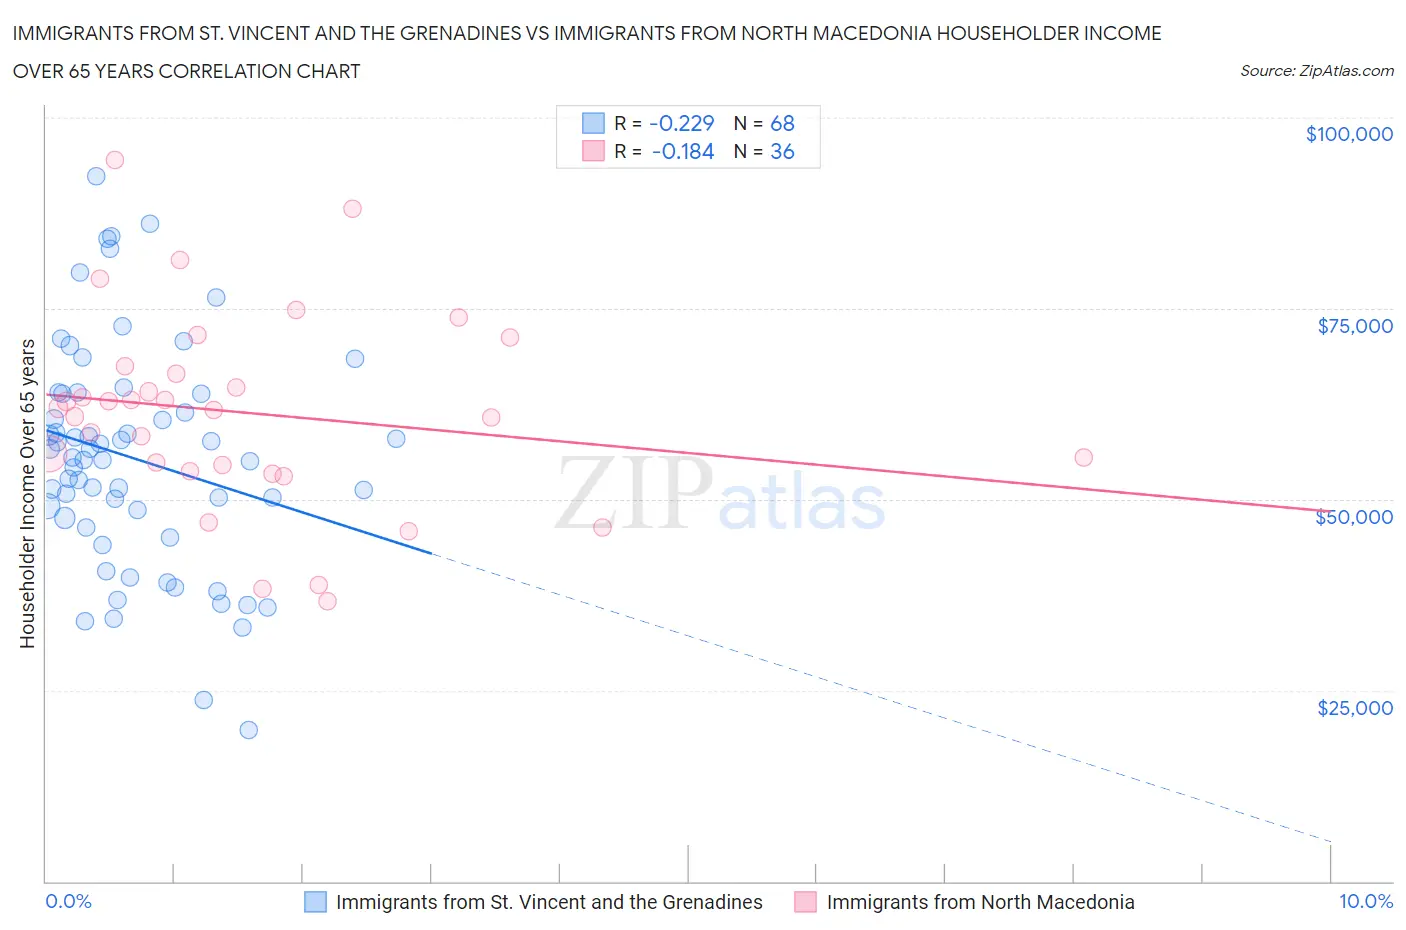 Immigrants from St. Vincent and the Grenadines vs Immigrants from North Macedonia Householder Income Over 65 years